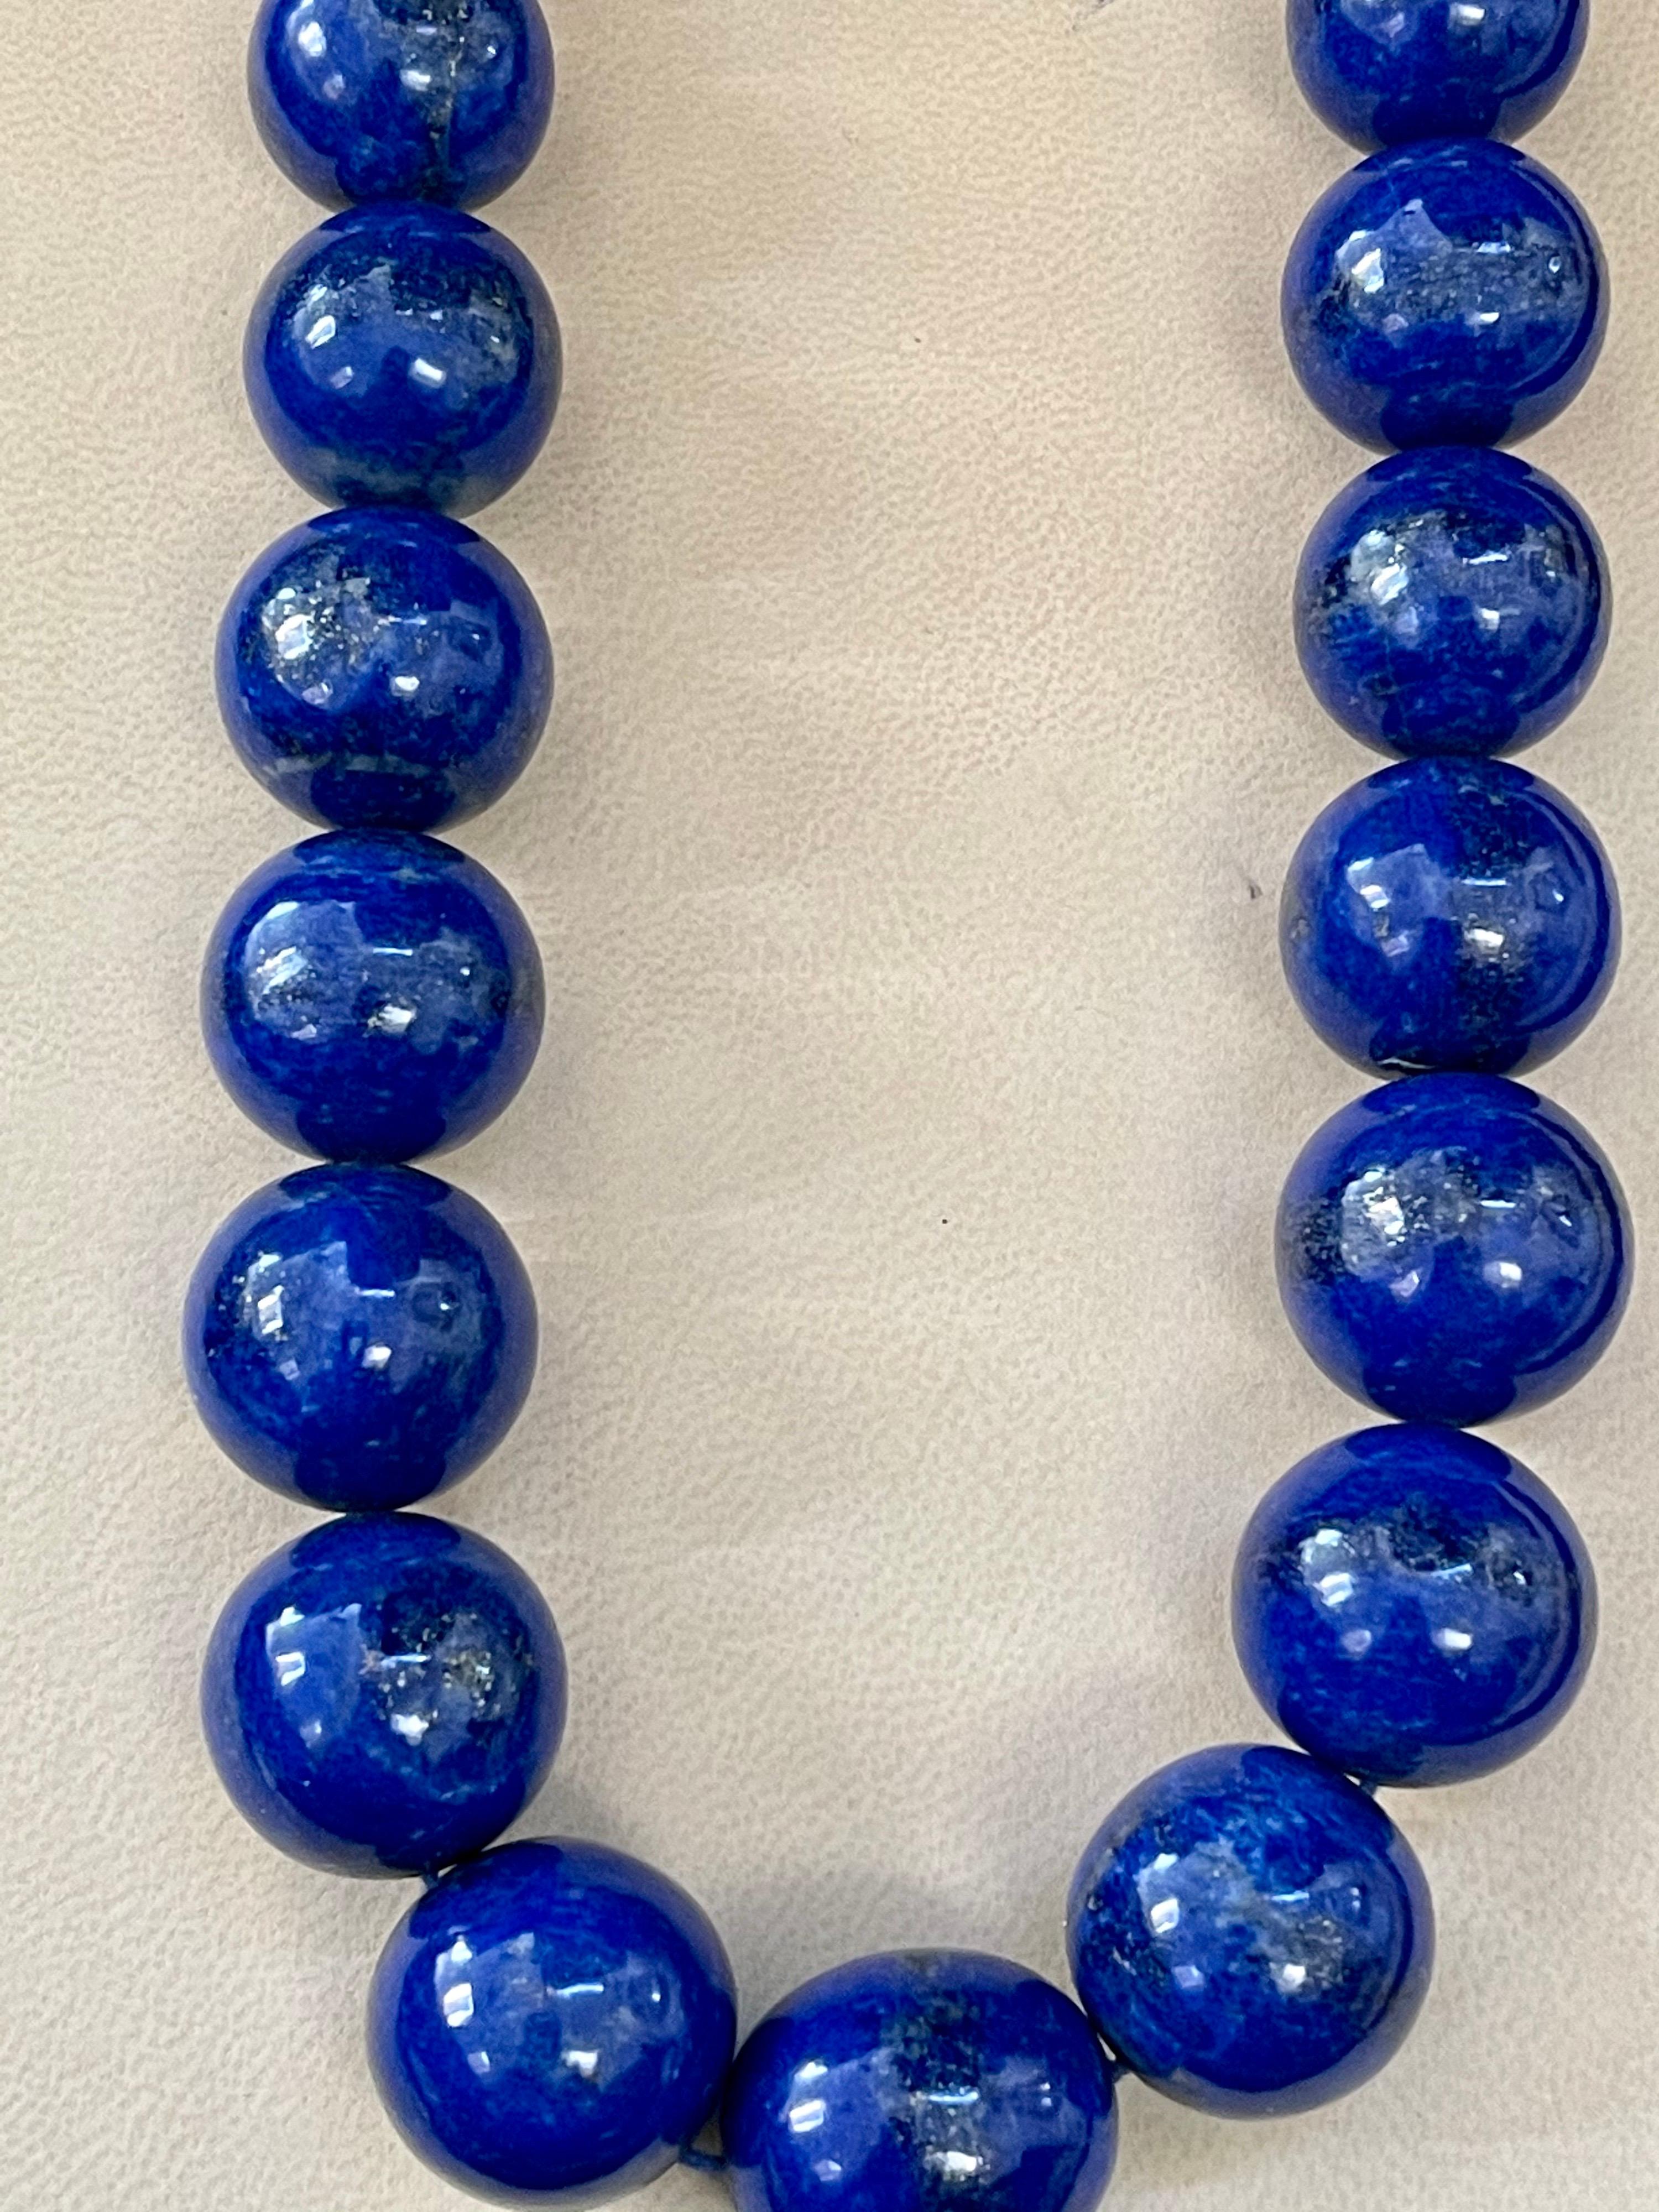 
Certified Lapis Lazuli Vintage Lapis Lazuli Single Strand Necklace with 1.1 Carat Diamond Ball Clasp in 14 Karat White Gold
This marvelous vintage Lapis Lazuli necklace features 1 row of luscious huge Beads
(measuring approximately from 25 MM to 17